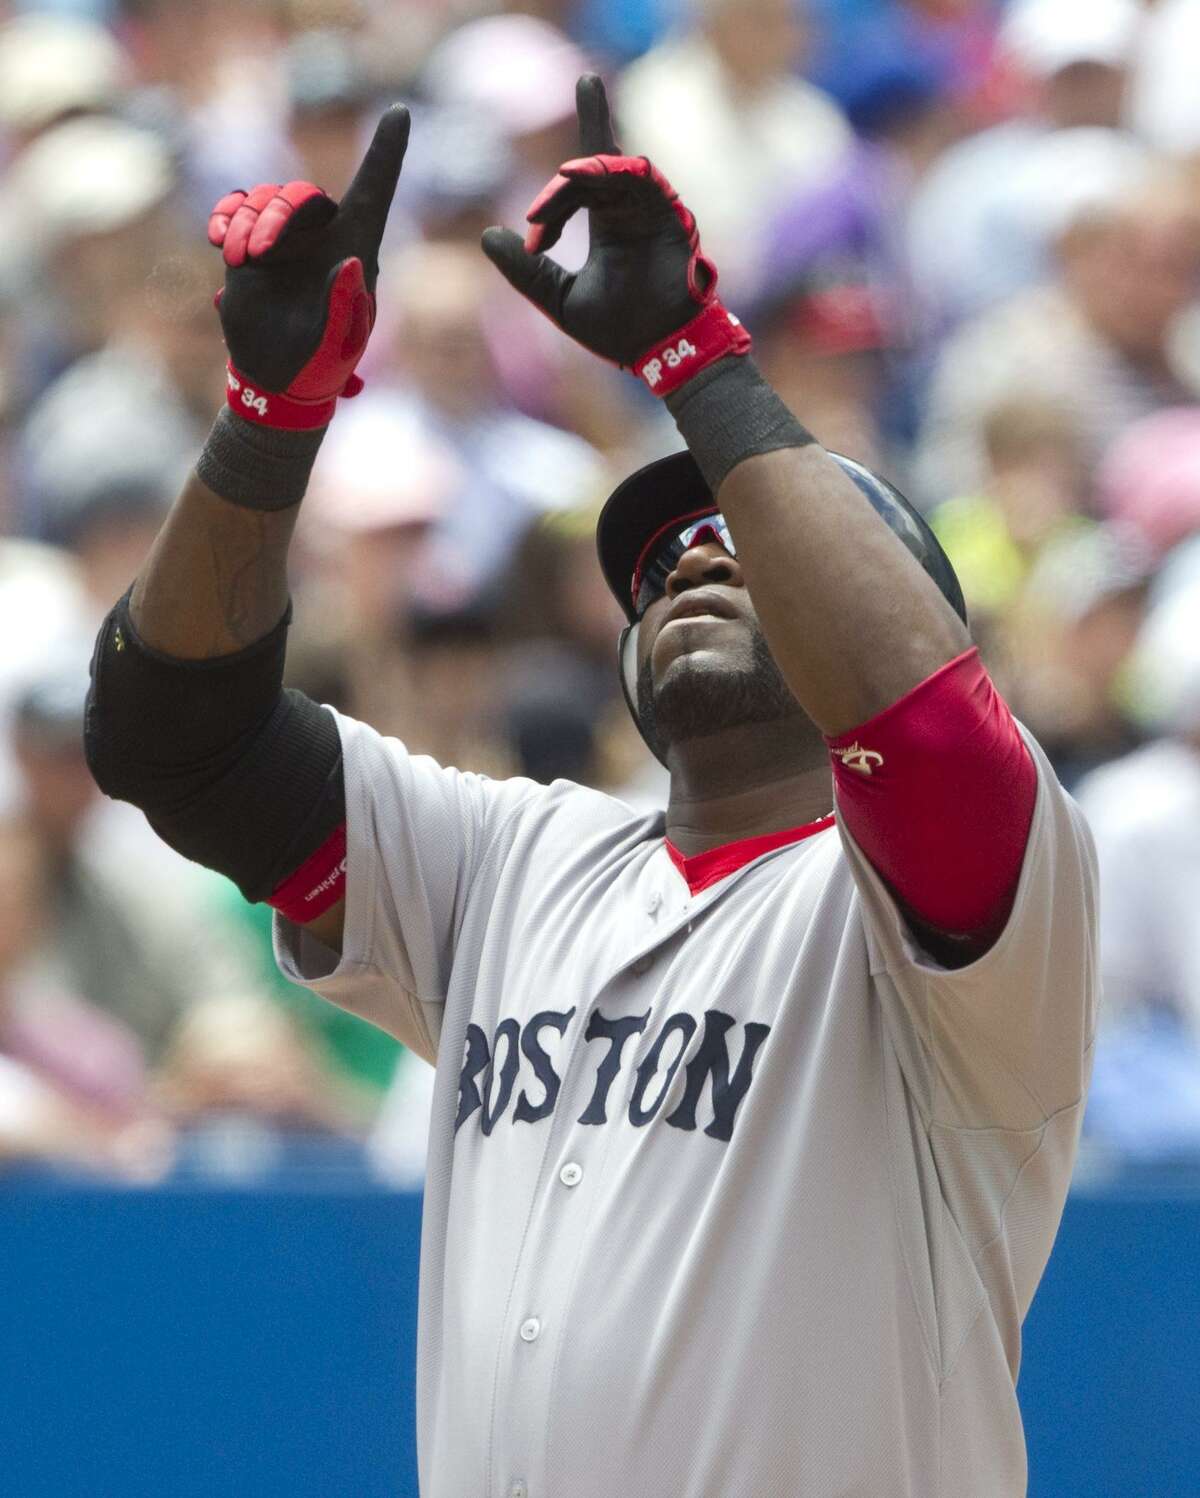 Boston Red Sox's David Ortiz celebrates a three-run home run in the fifth inning of MLB baseball game action against the Toronto Blue Jays in Toronto, Sunday, June 12, 2011. (AP Photo/The Canadian Press, Darren Calabrese)